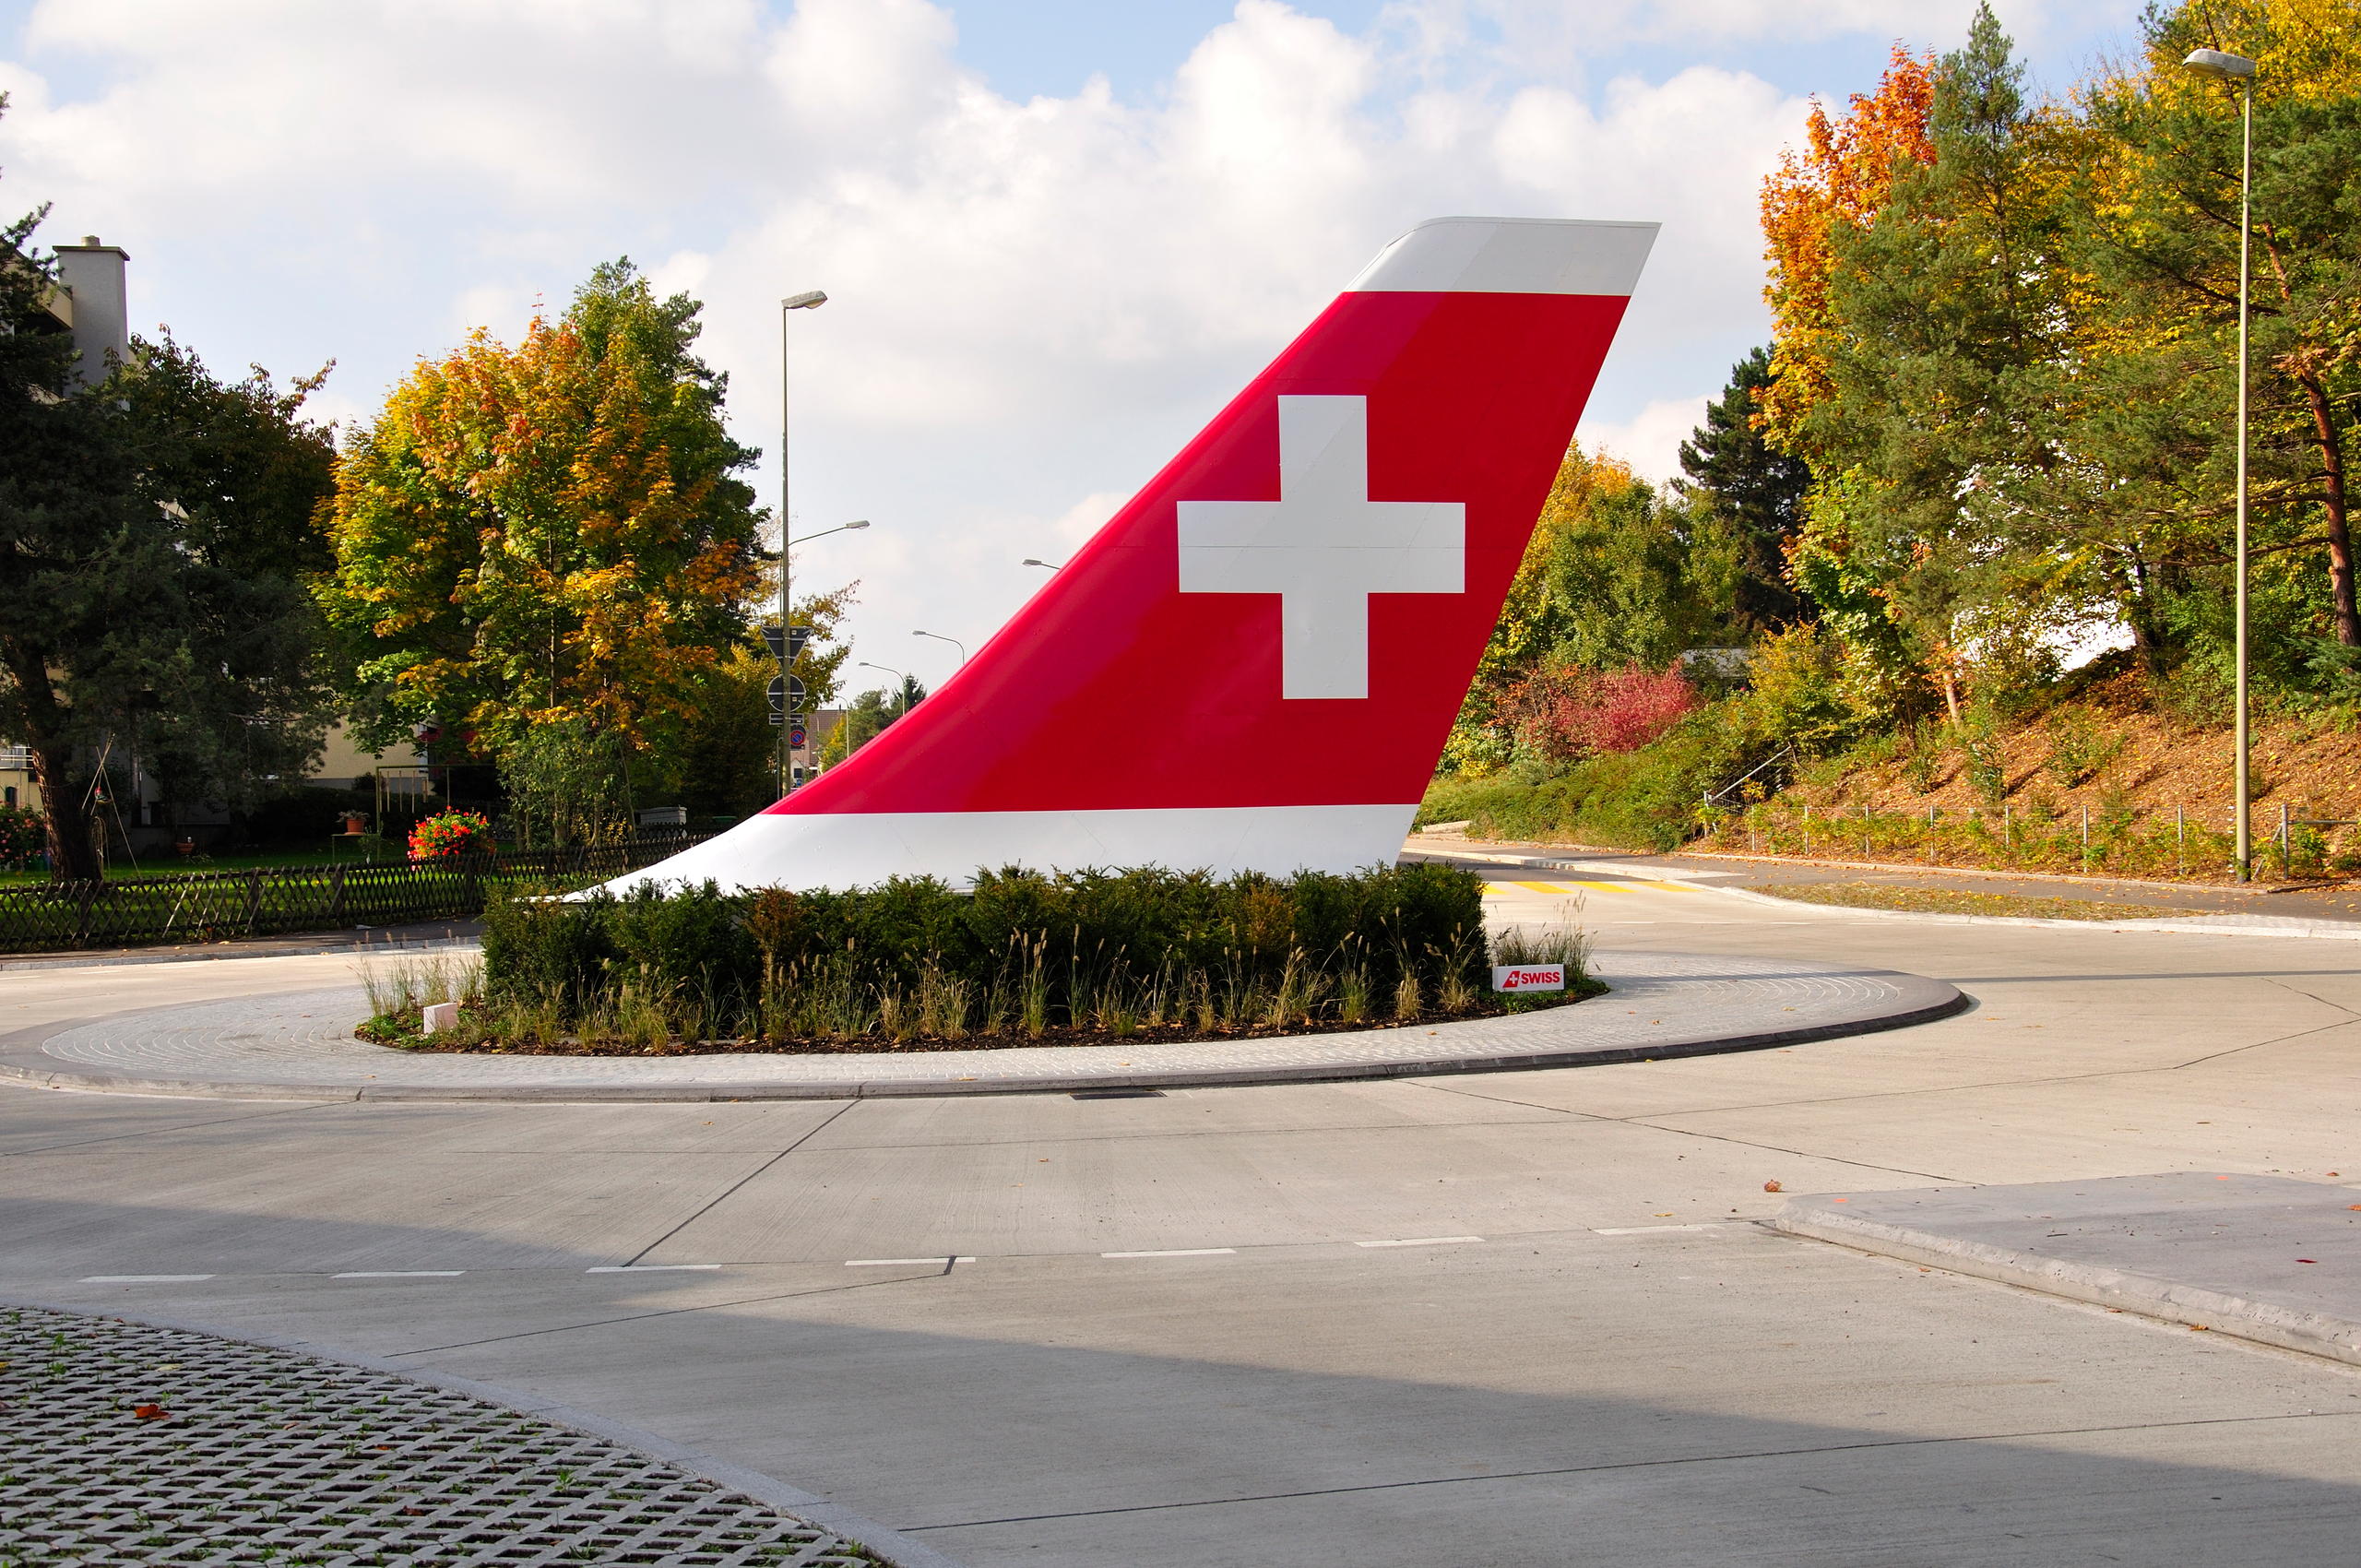 Tail wing of a Swissair aeroplane situated in bushes on a roundabout